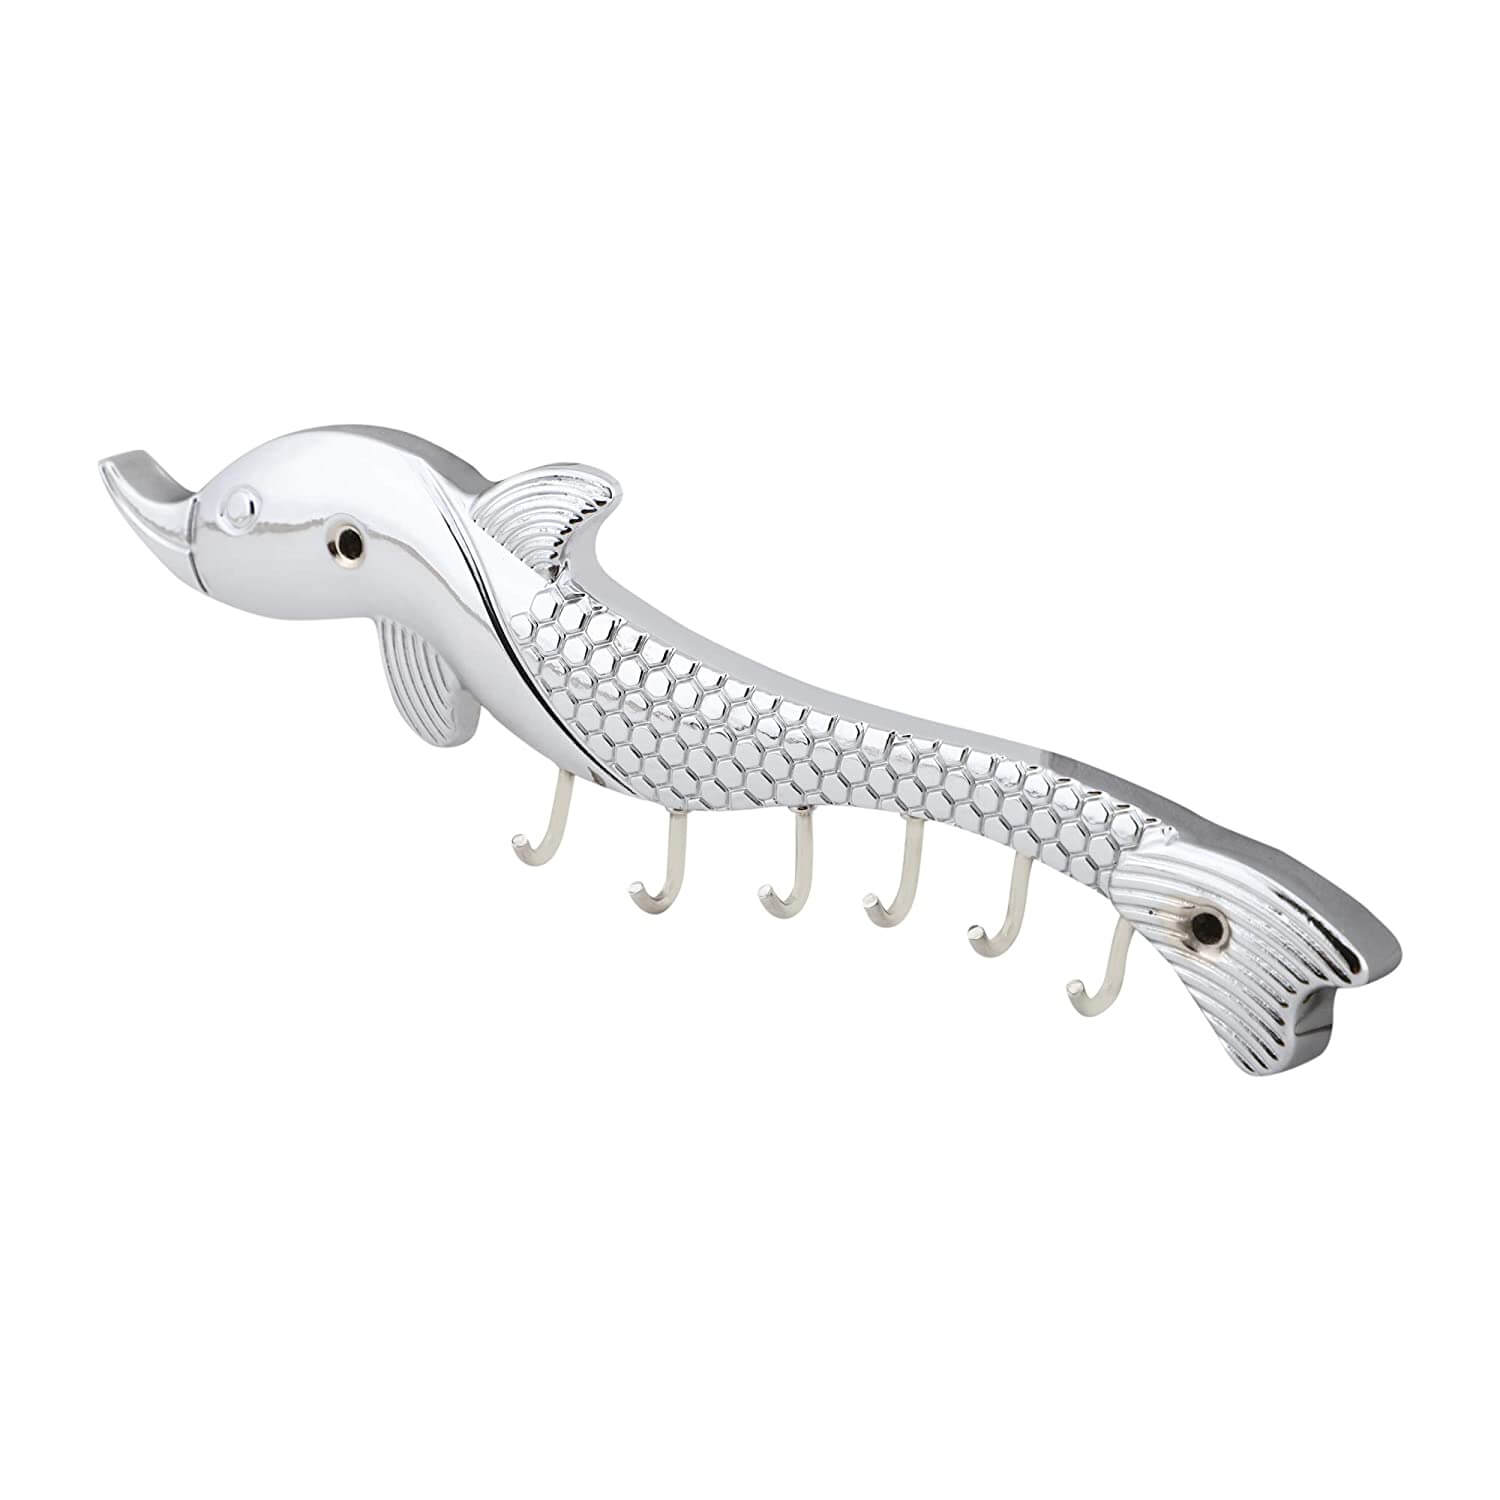 Chrome & Glossy Fish Key Holder for Wall - 6 Pin Key Hanging Hooks Rail Mangal Fashions | Indian Home Decor and Craft